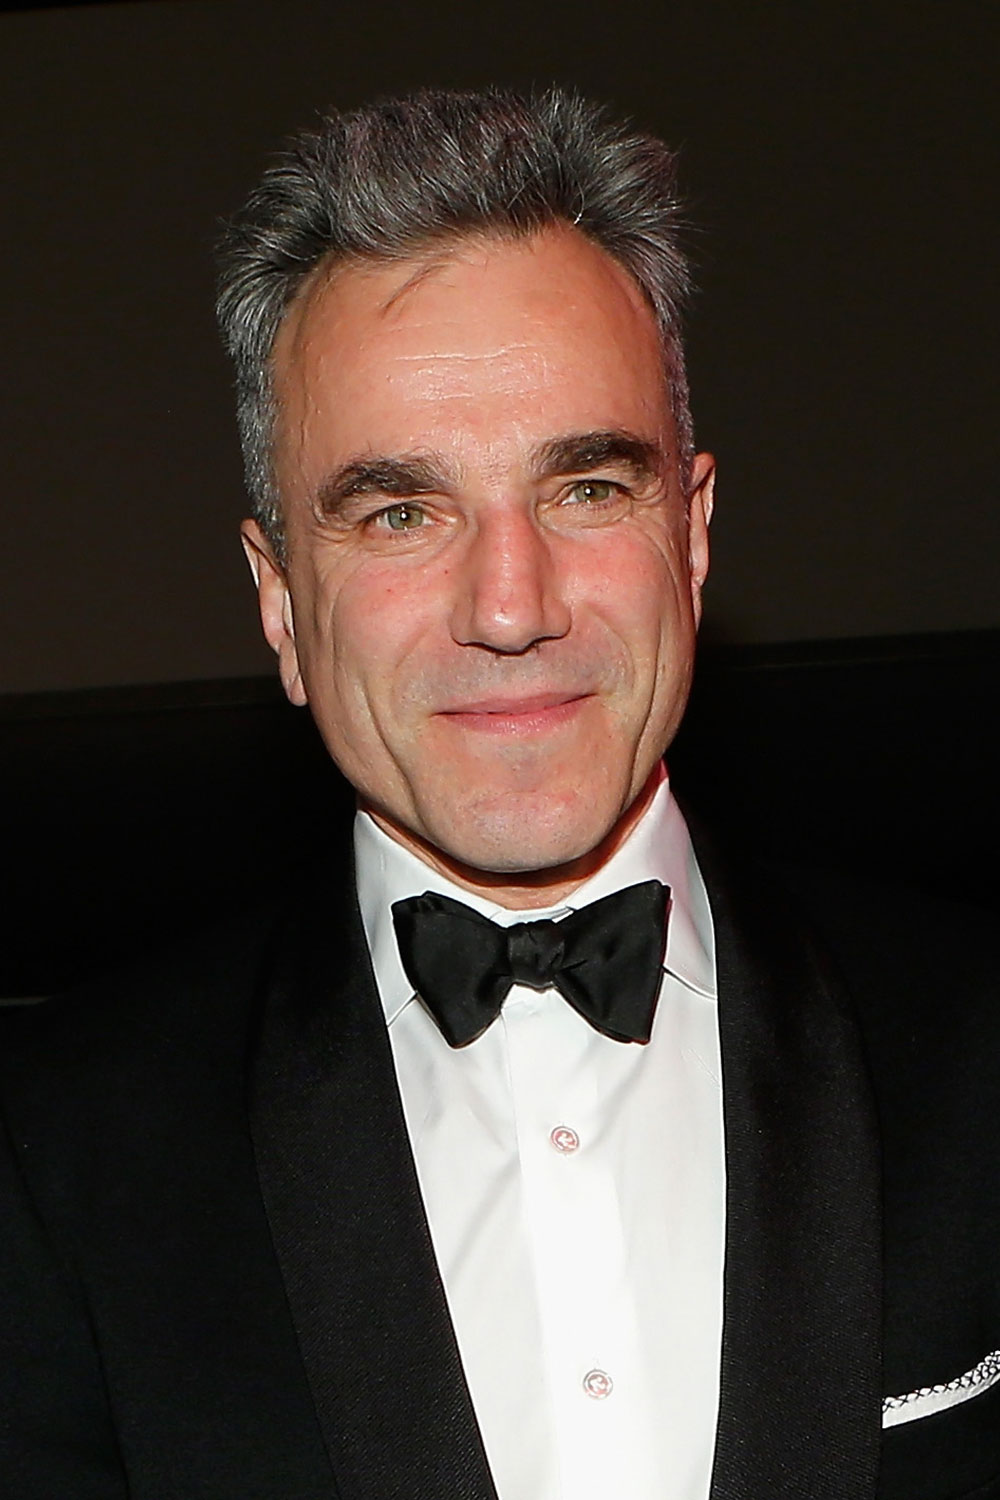 Gabriel-Kane is the son of silver screen silver-fox, Daniel Day-Lewis. Photo / Getty Images